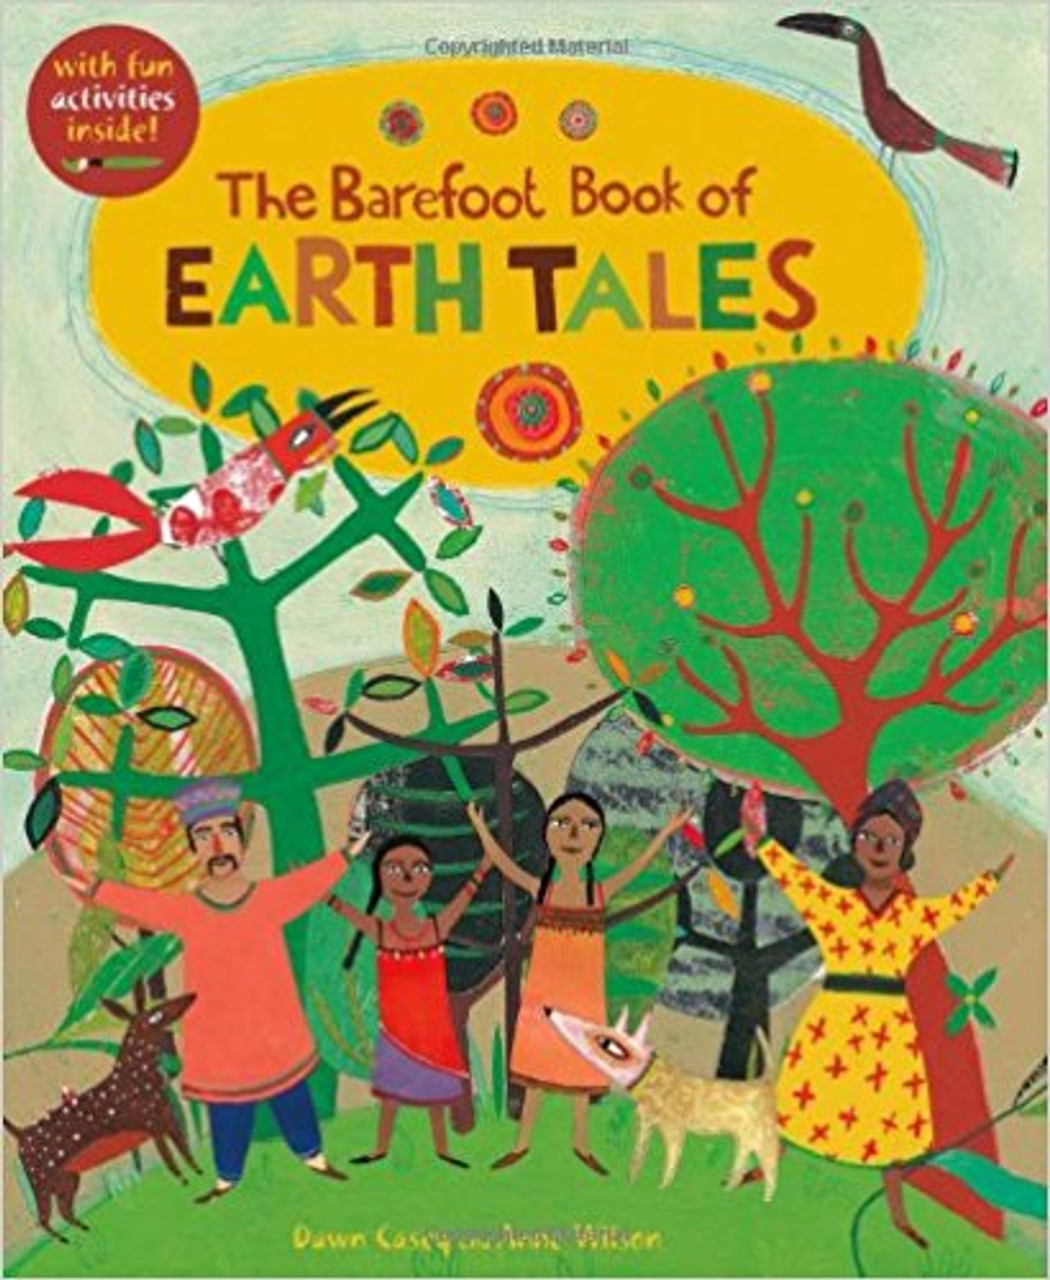 The Barefoot Book of Earth Tales by Dawn Casey